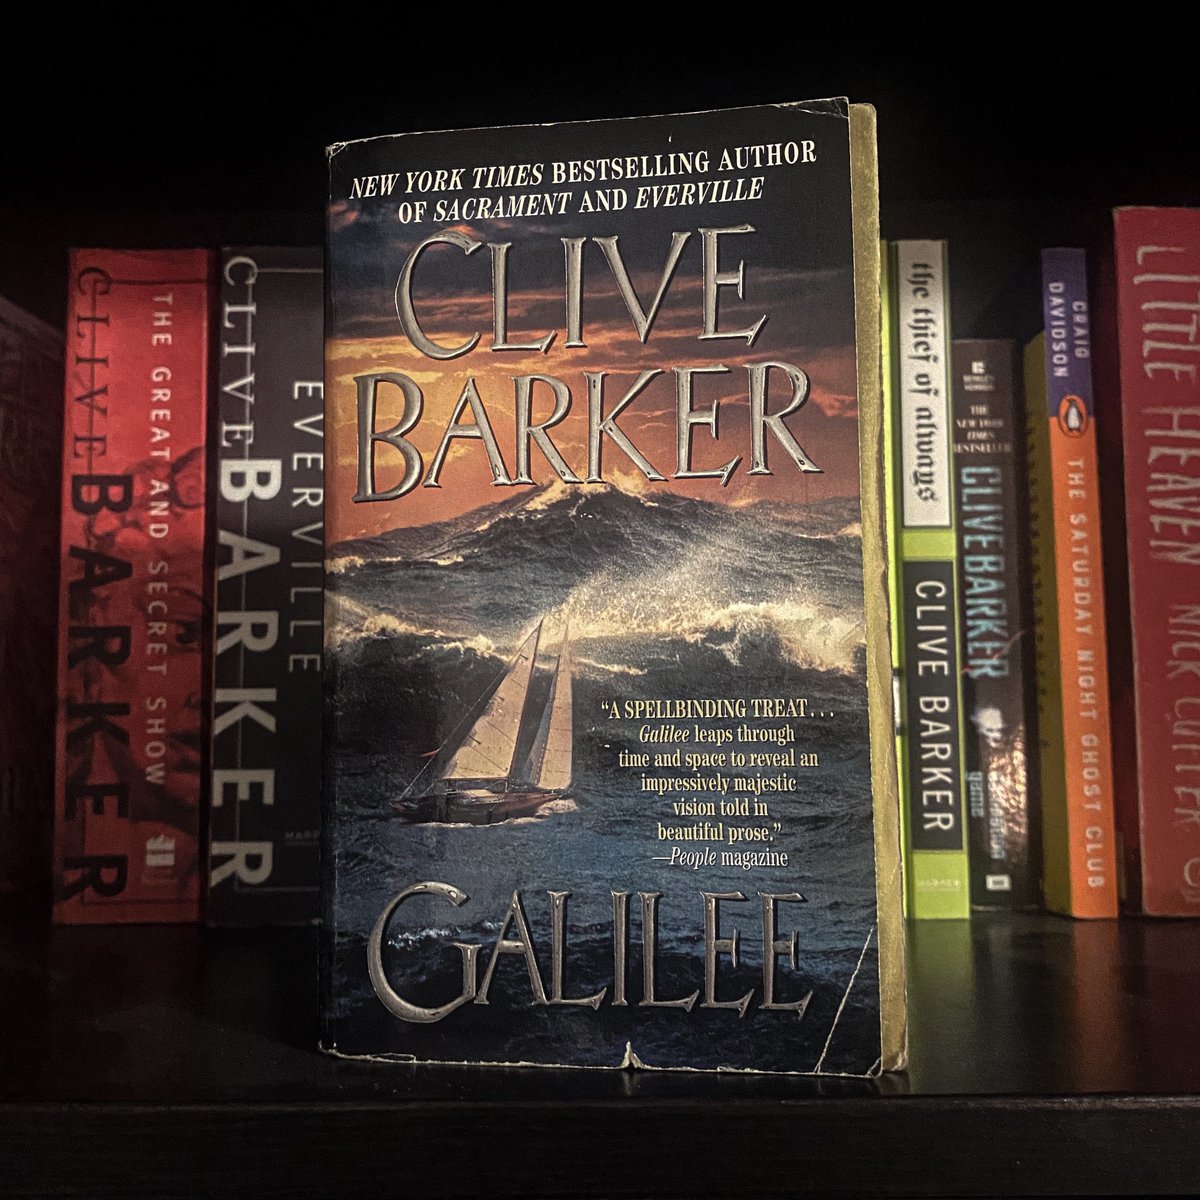 I think Galilee is Clive Barker novel’s most under-appreciated novel. It’s been about six years since I’ve read it, and I’m still trying to wrap my head around the sheer scope and originality of the story. It’s equal parts romance, erotic, adventure, dark fantasy, horror—in fact,…